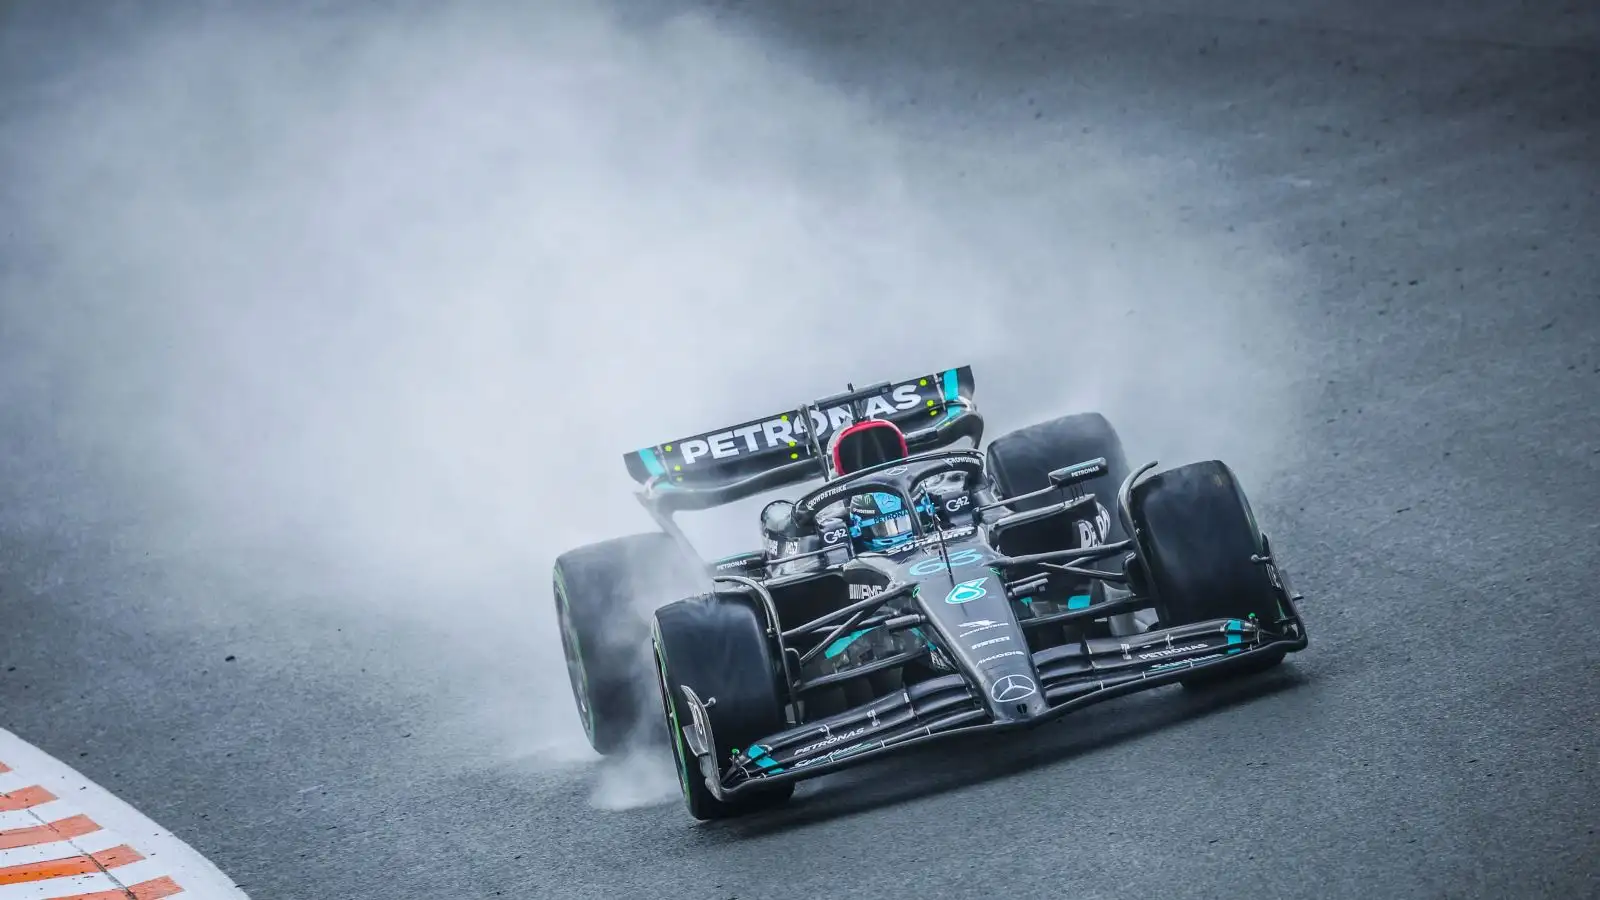 Mercedes driver George Russell tackles a wet track in the Dutch Grand Prix at Zandvoort.